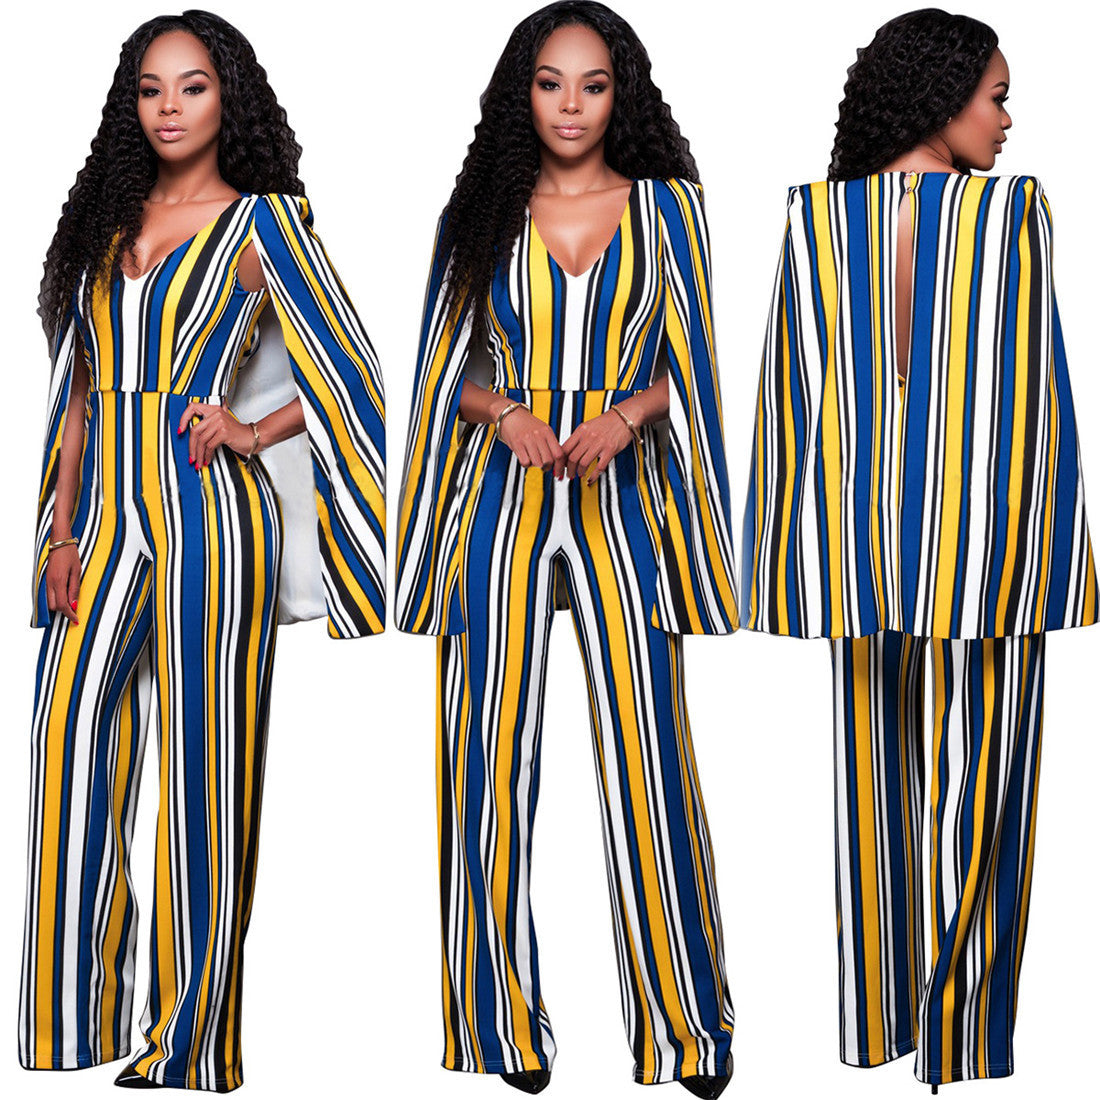 Online discount shop Australia - FASHION V-Neck Sleeveless Cape Rompers Womens Jumpsuit High Waist Backless Sexy Long Bodysuit Women Striped Overalls